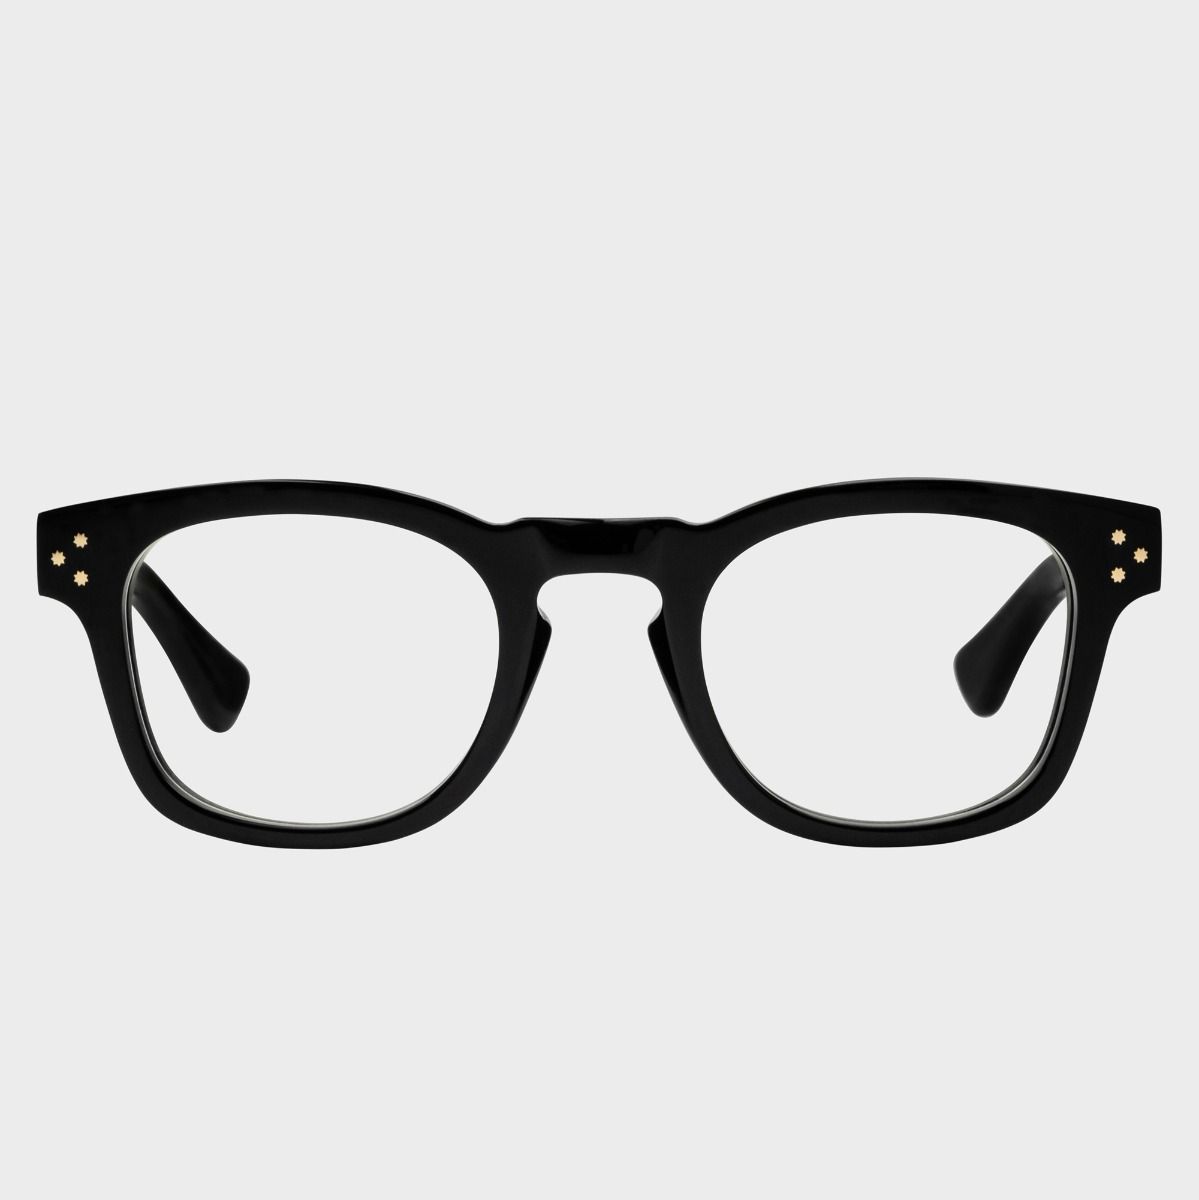 Cutler and Gross, 1389 Optical Square Glasses - Black